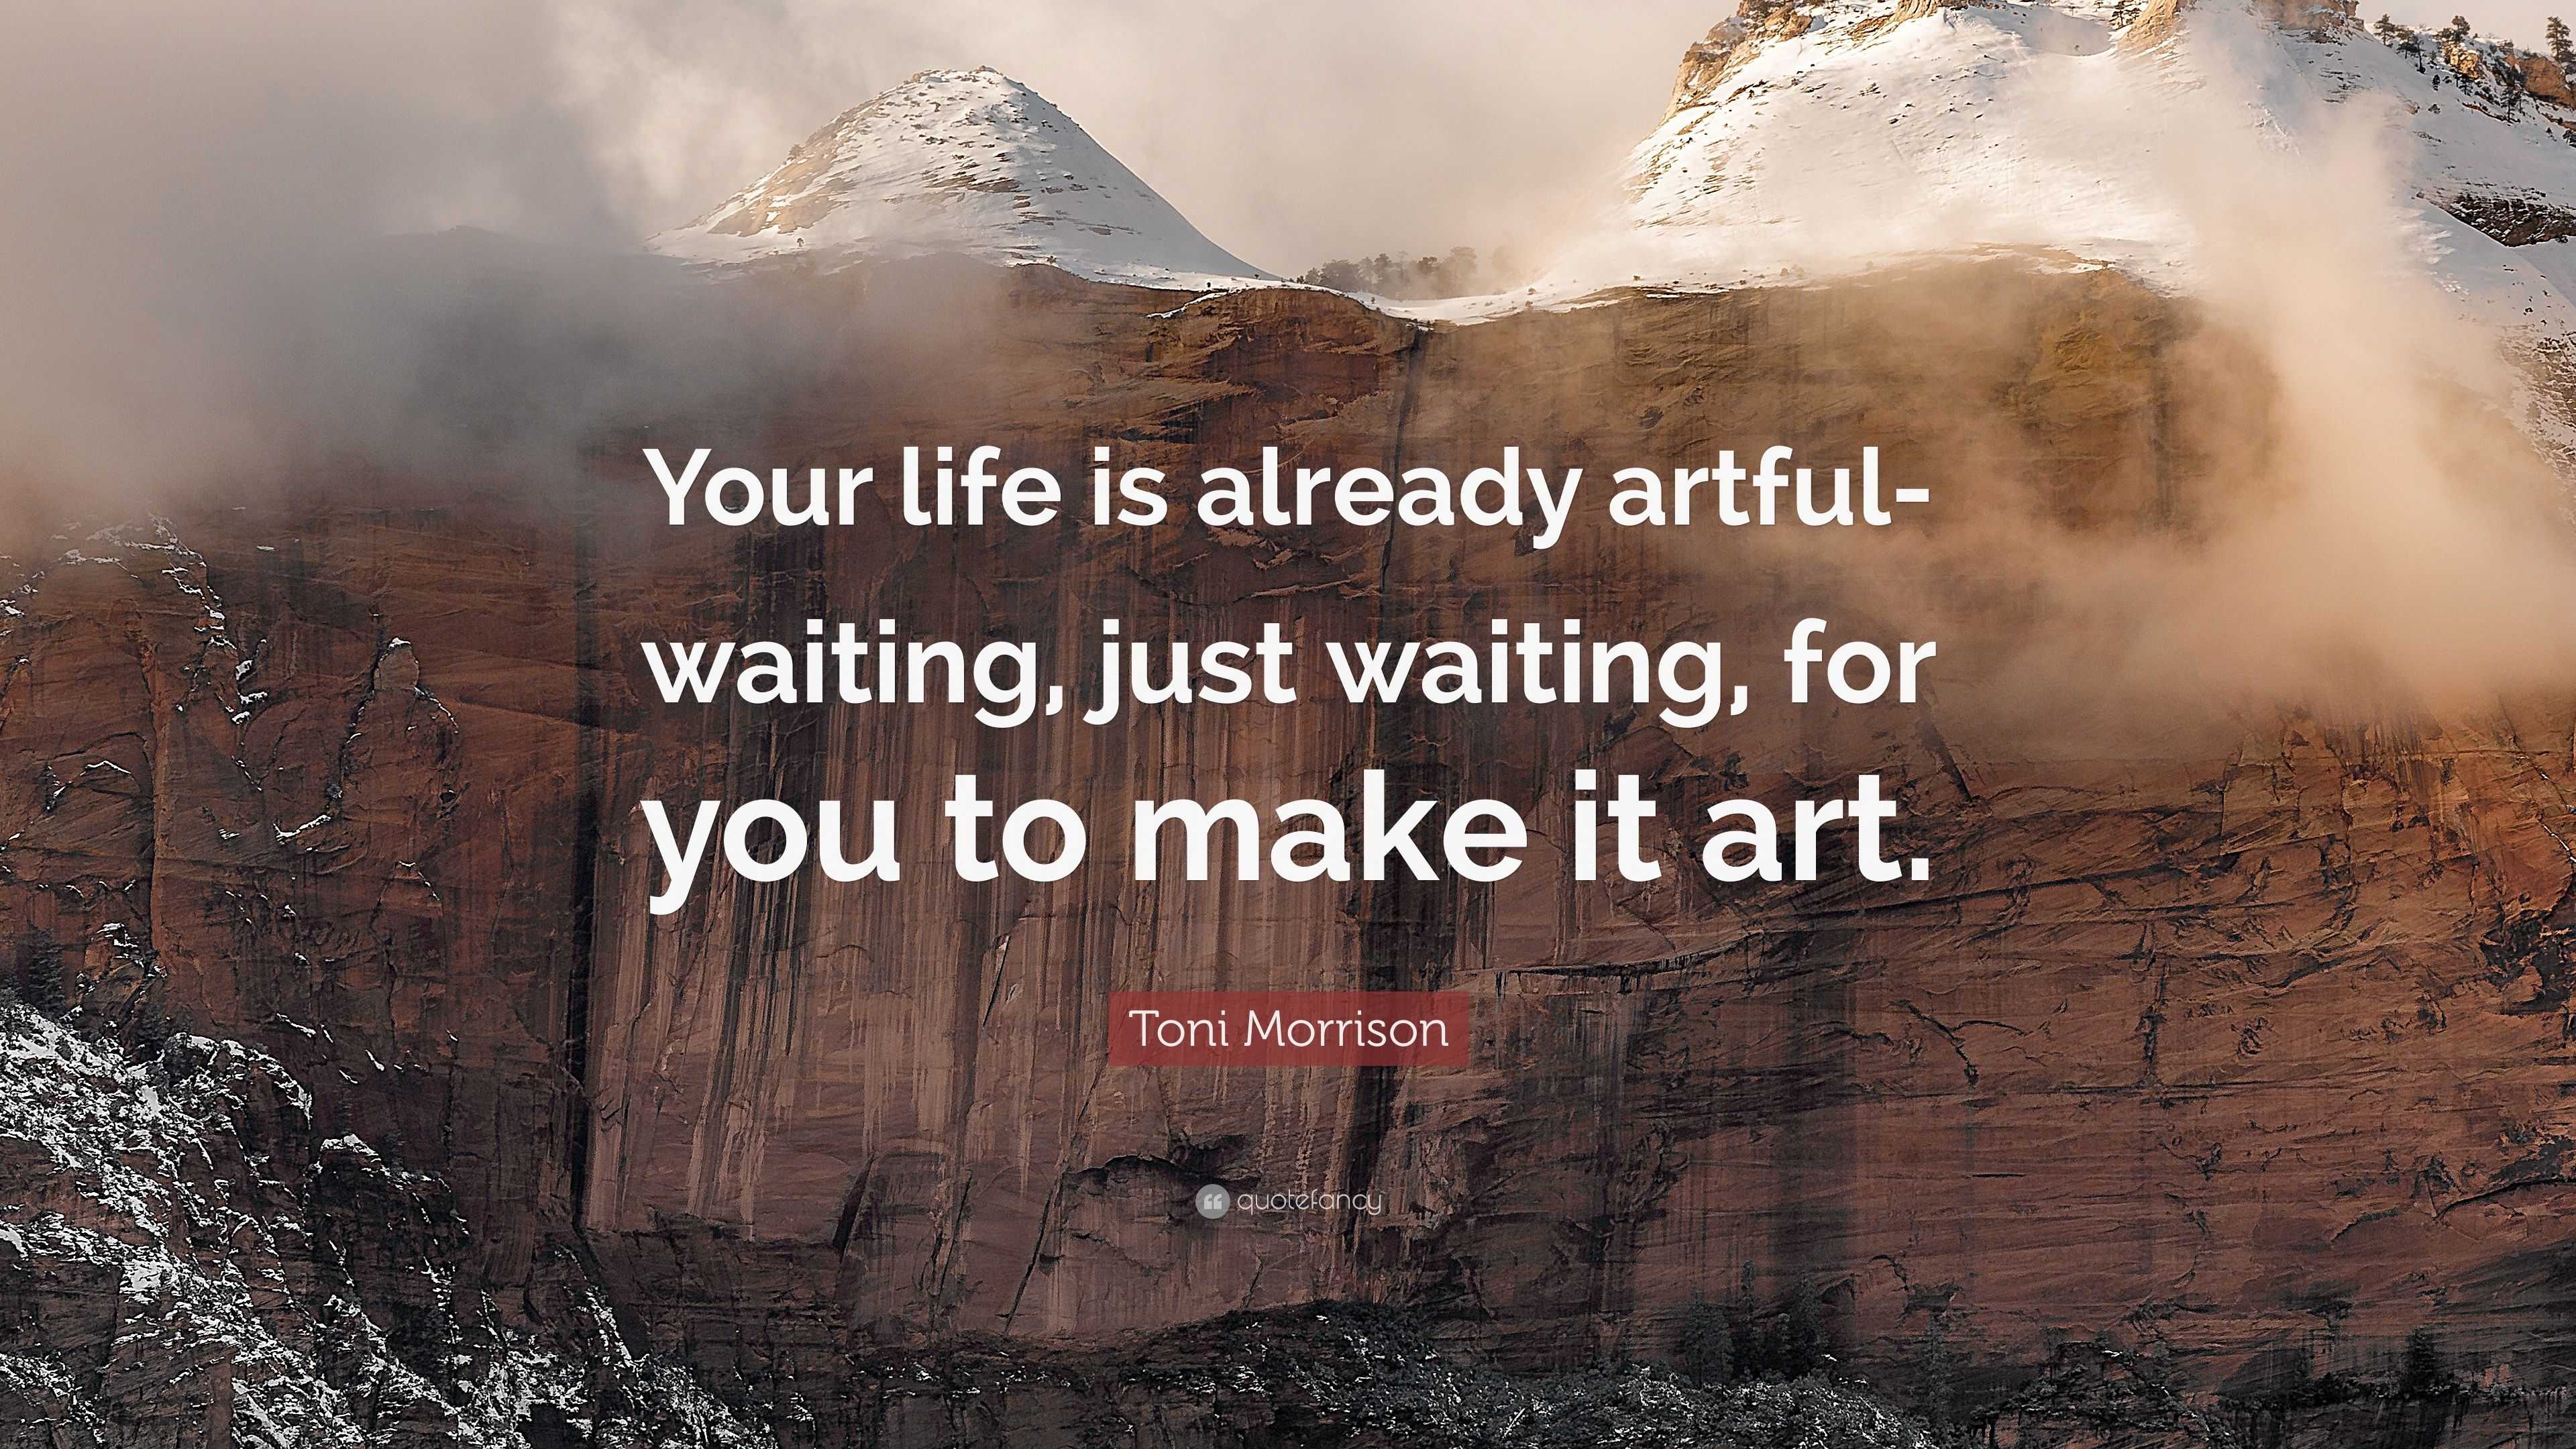 Toni Morrison Quote “Your life is already artful waiting just waiting